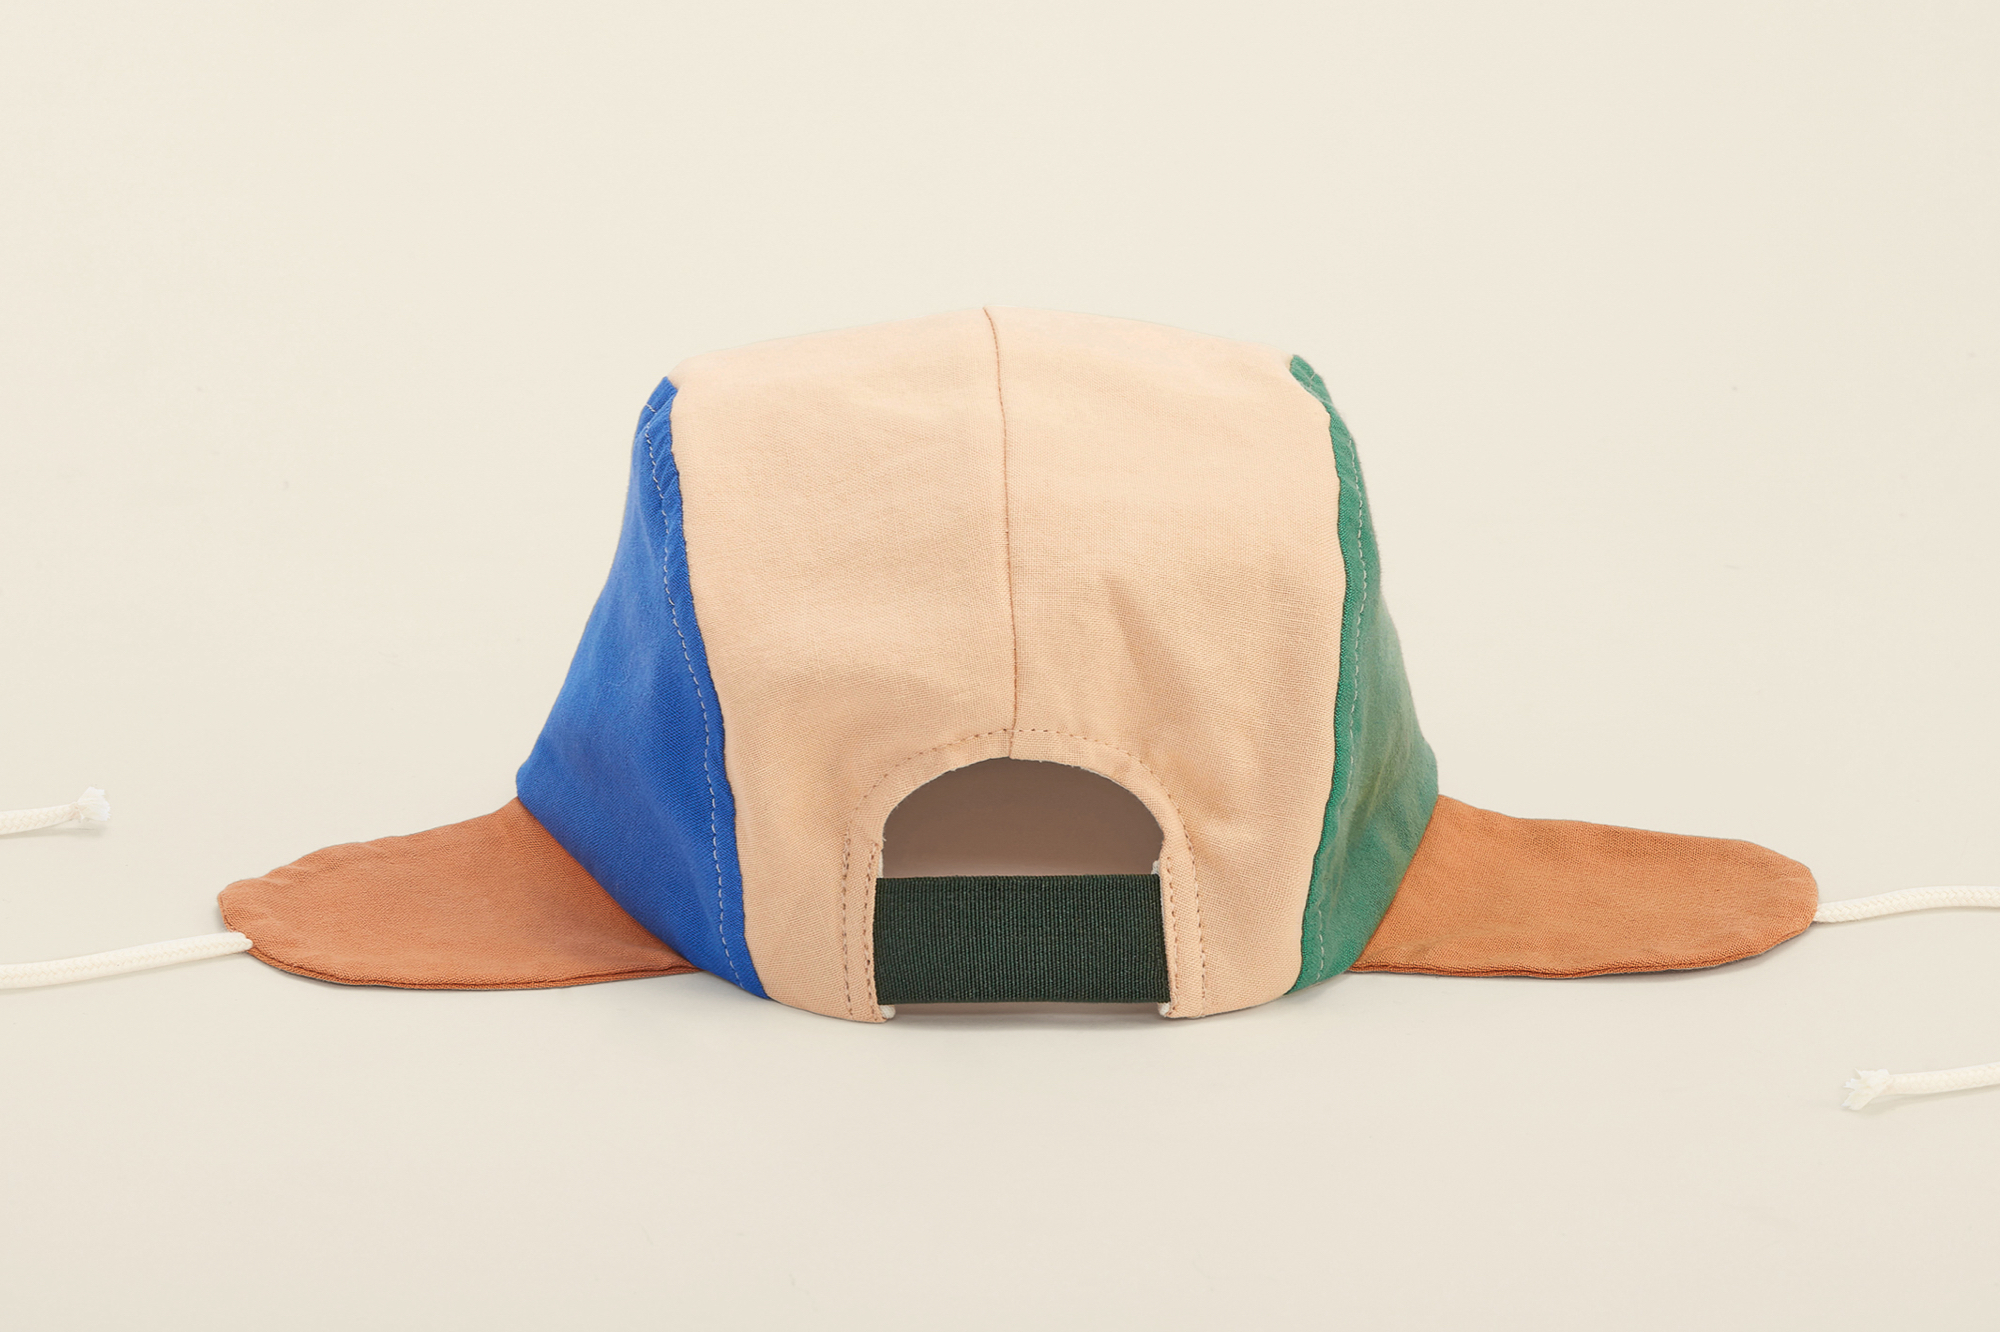 NKitH Cap 'Wolly - 5 Panel Colorblock'